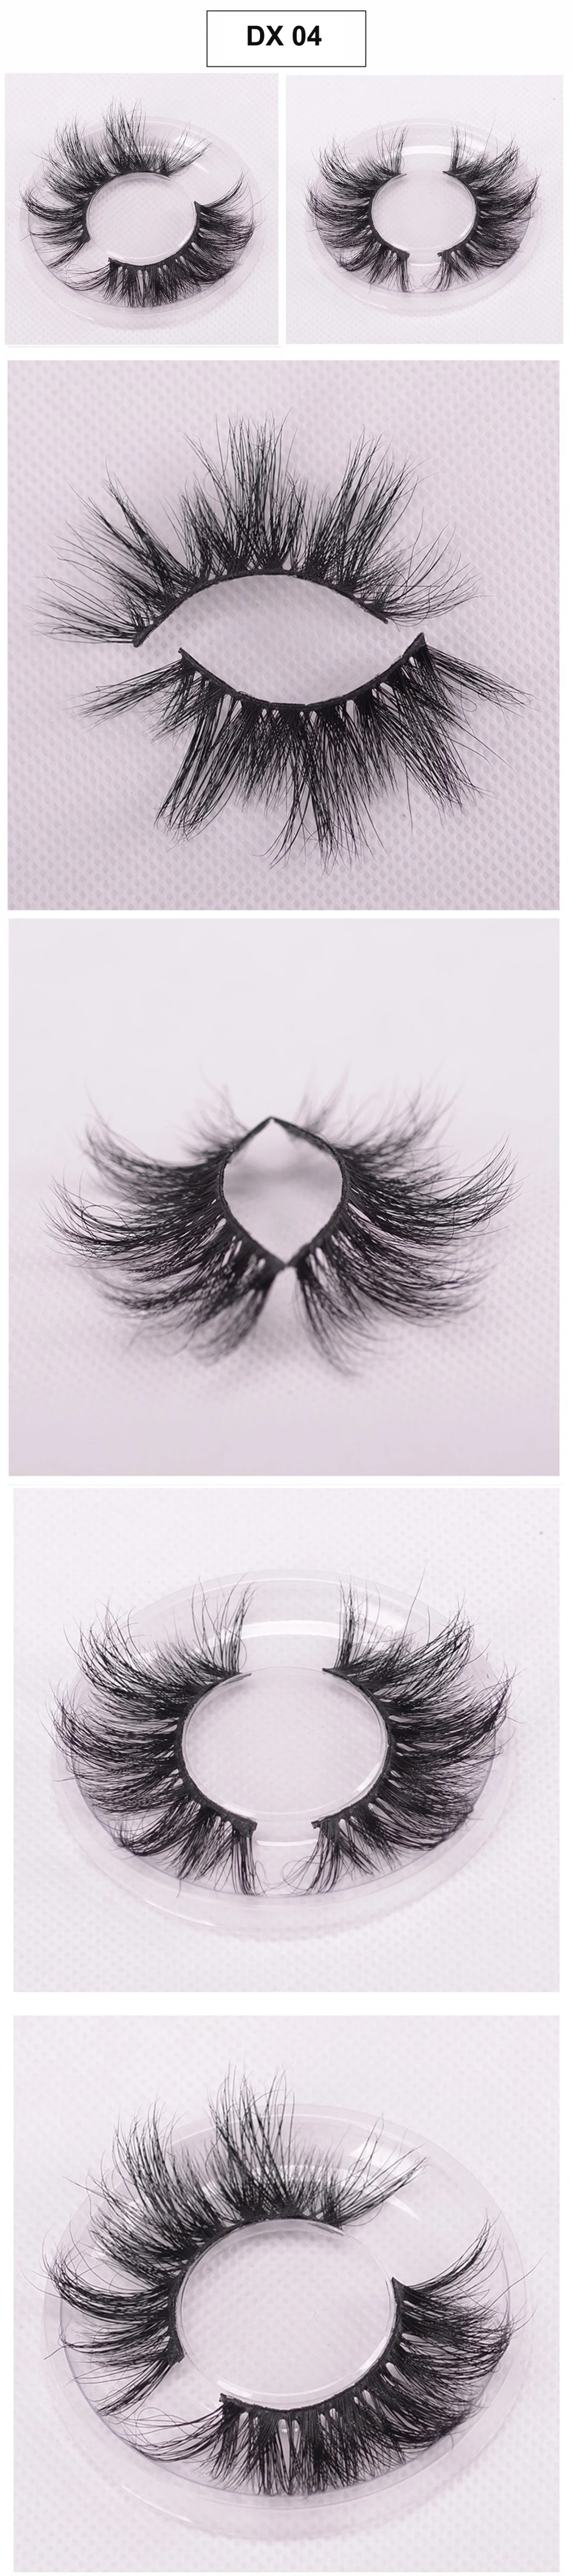 Cruelty Free Real Mink Lashes with Customized Packaging for Eye Lashes